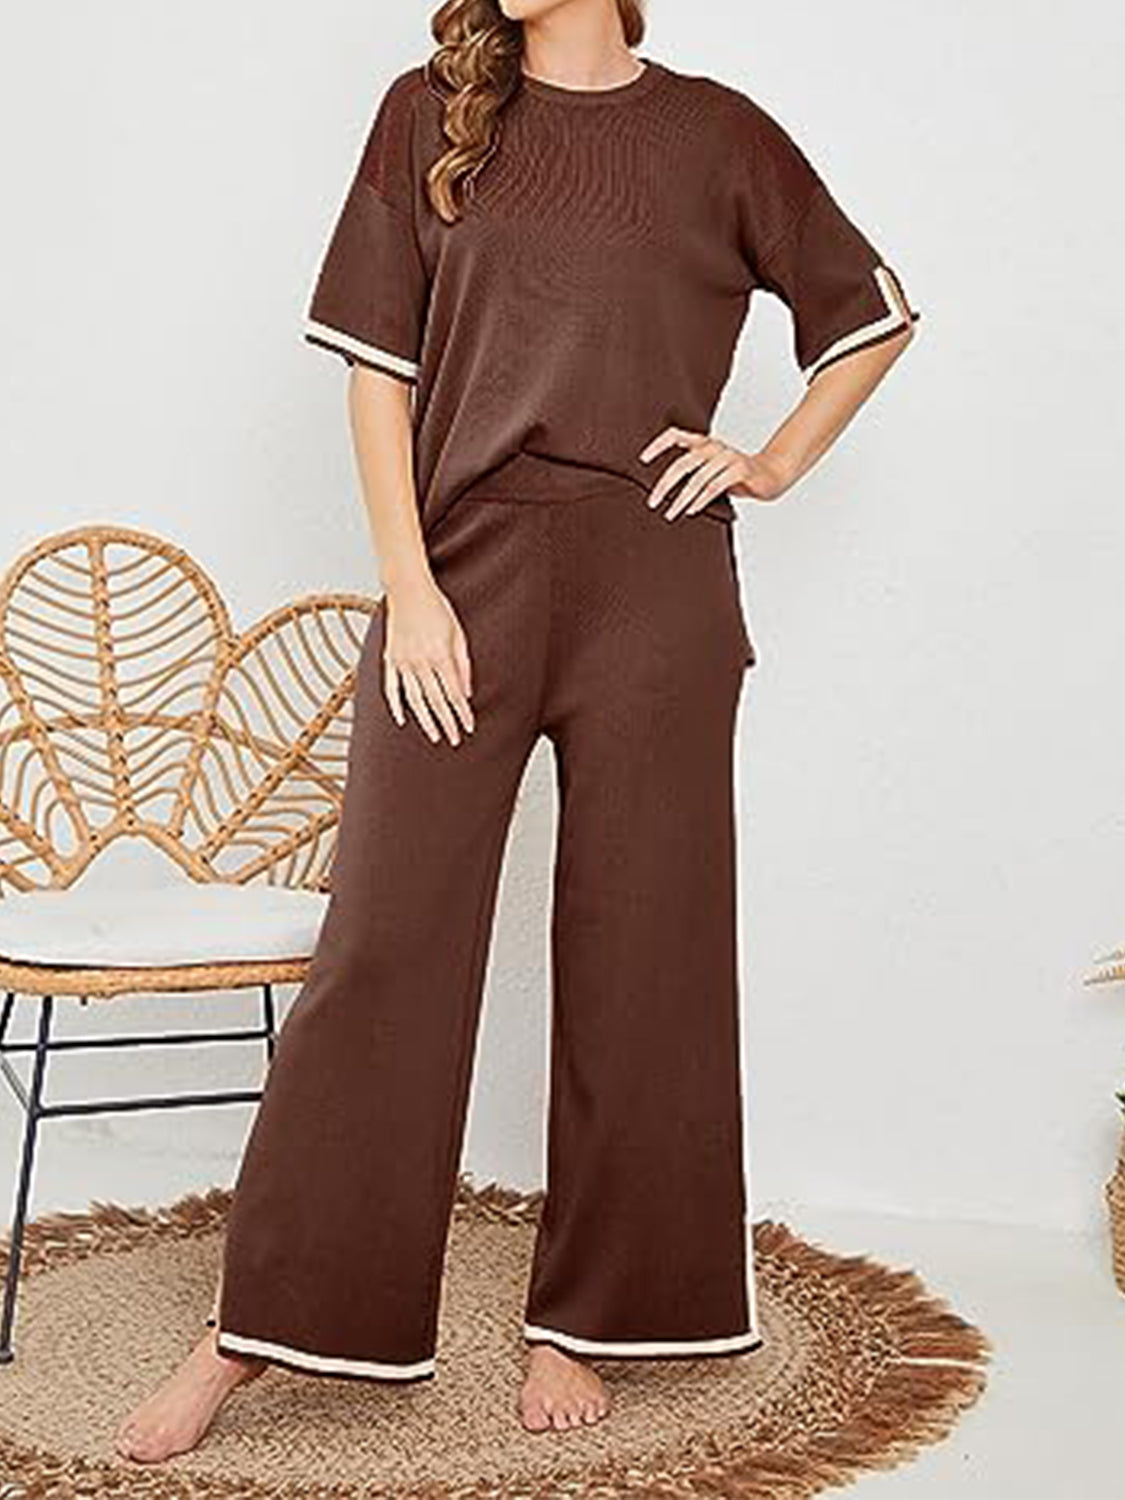 Saddle Brown Contrast High-Low Sweater and Knit Pants Set Sentient Beauty Fashions Apparel & Accessories